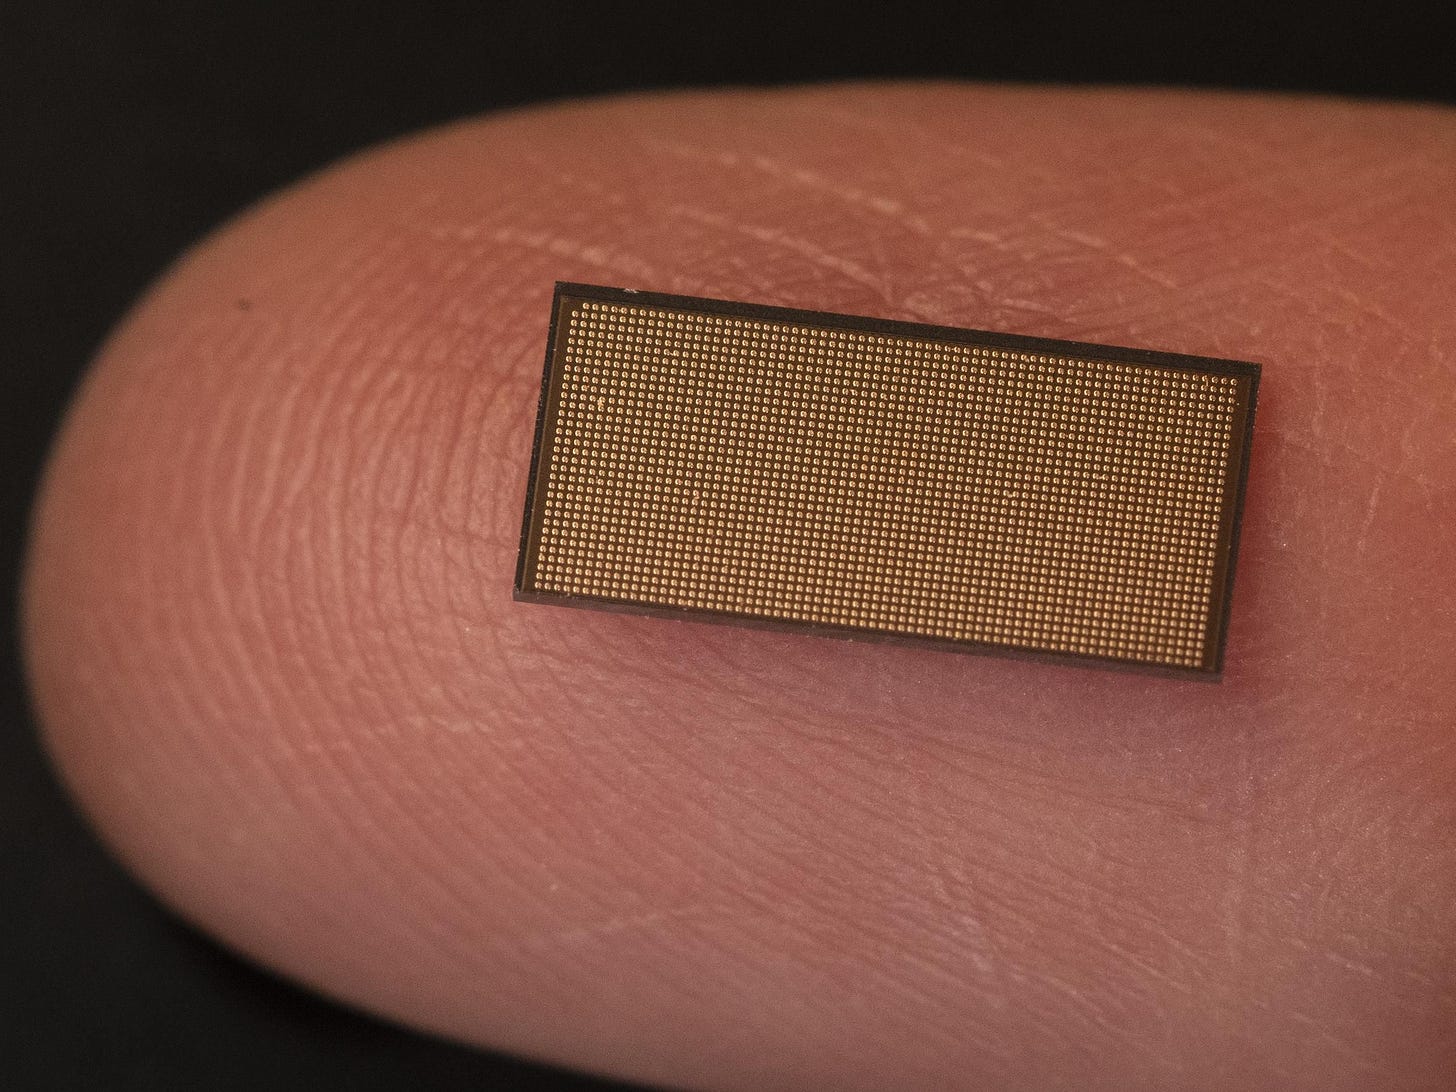 A tiny chip rests on a fingertip. It is rectangular with a dense matrix of tiny gold dots.